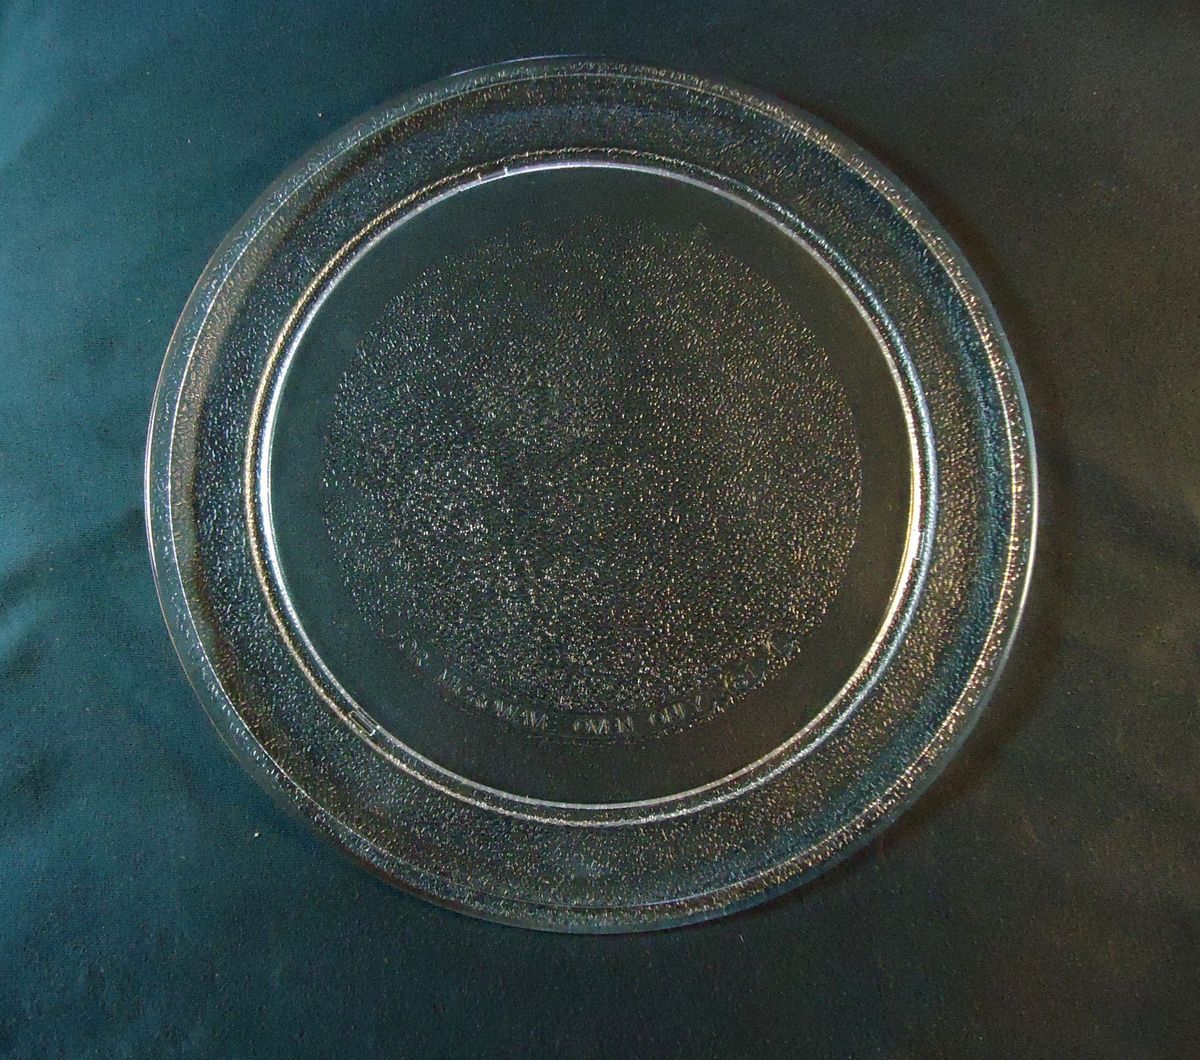 Diameter Microwave Oven Round Glass Cooking Tray Plate 81 L GE